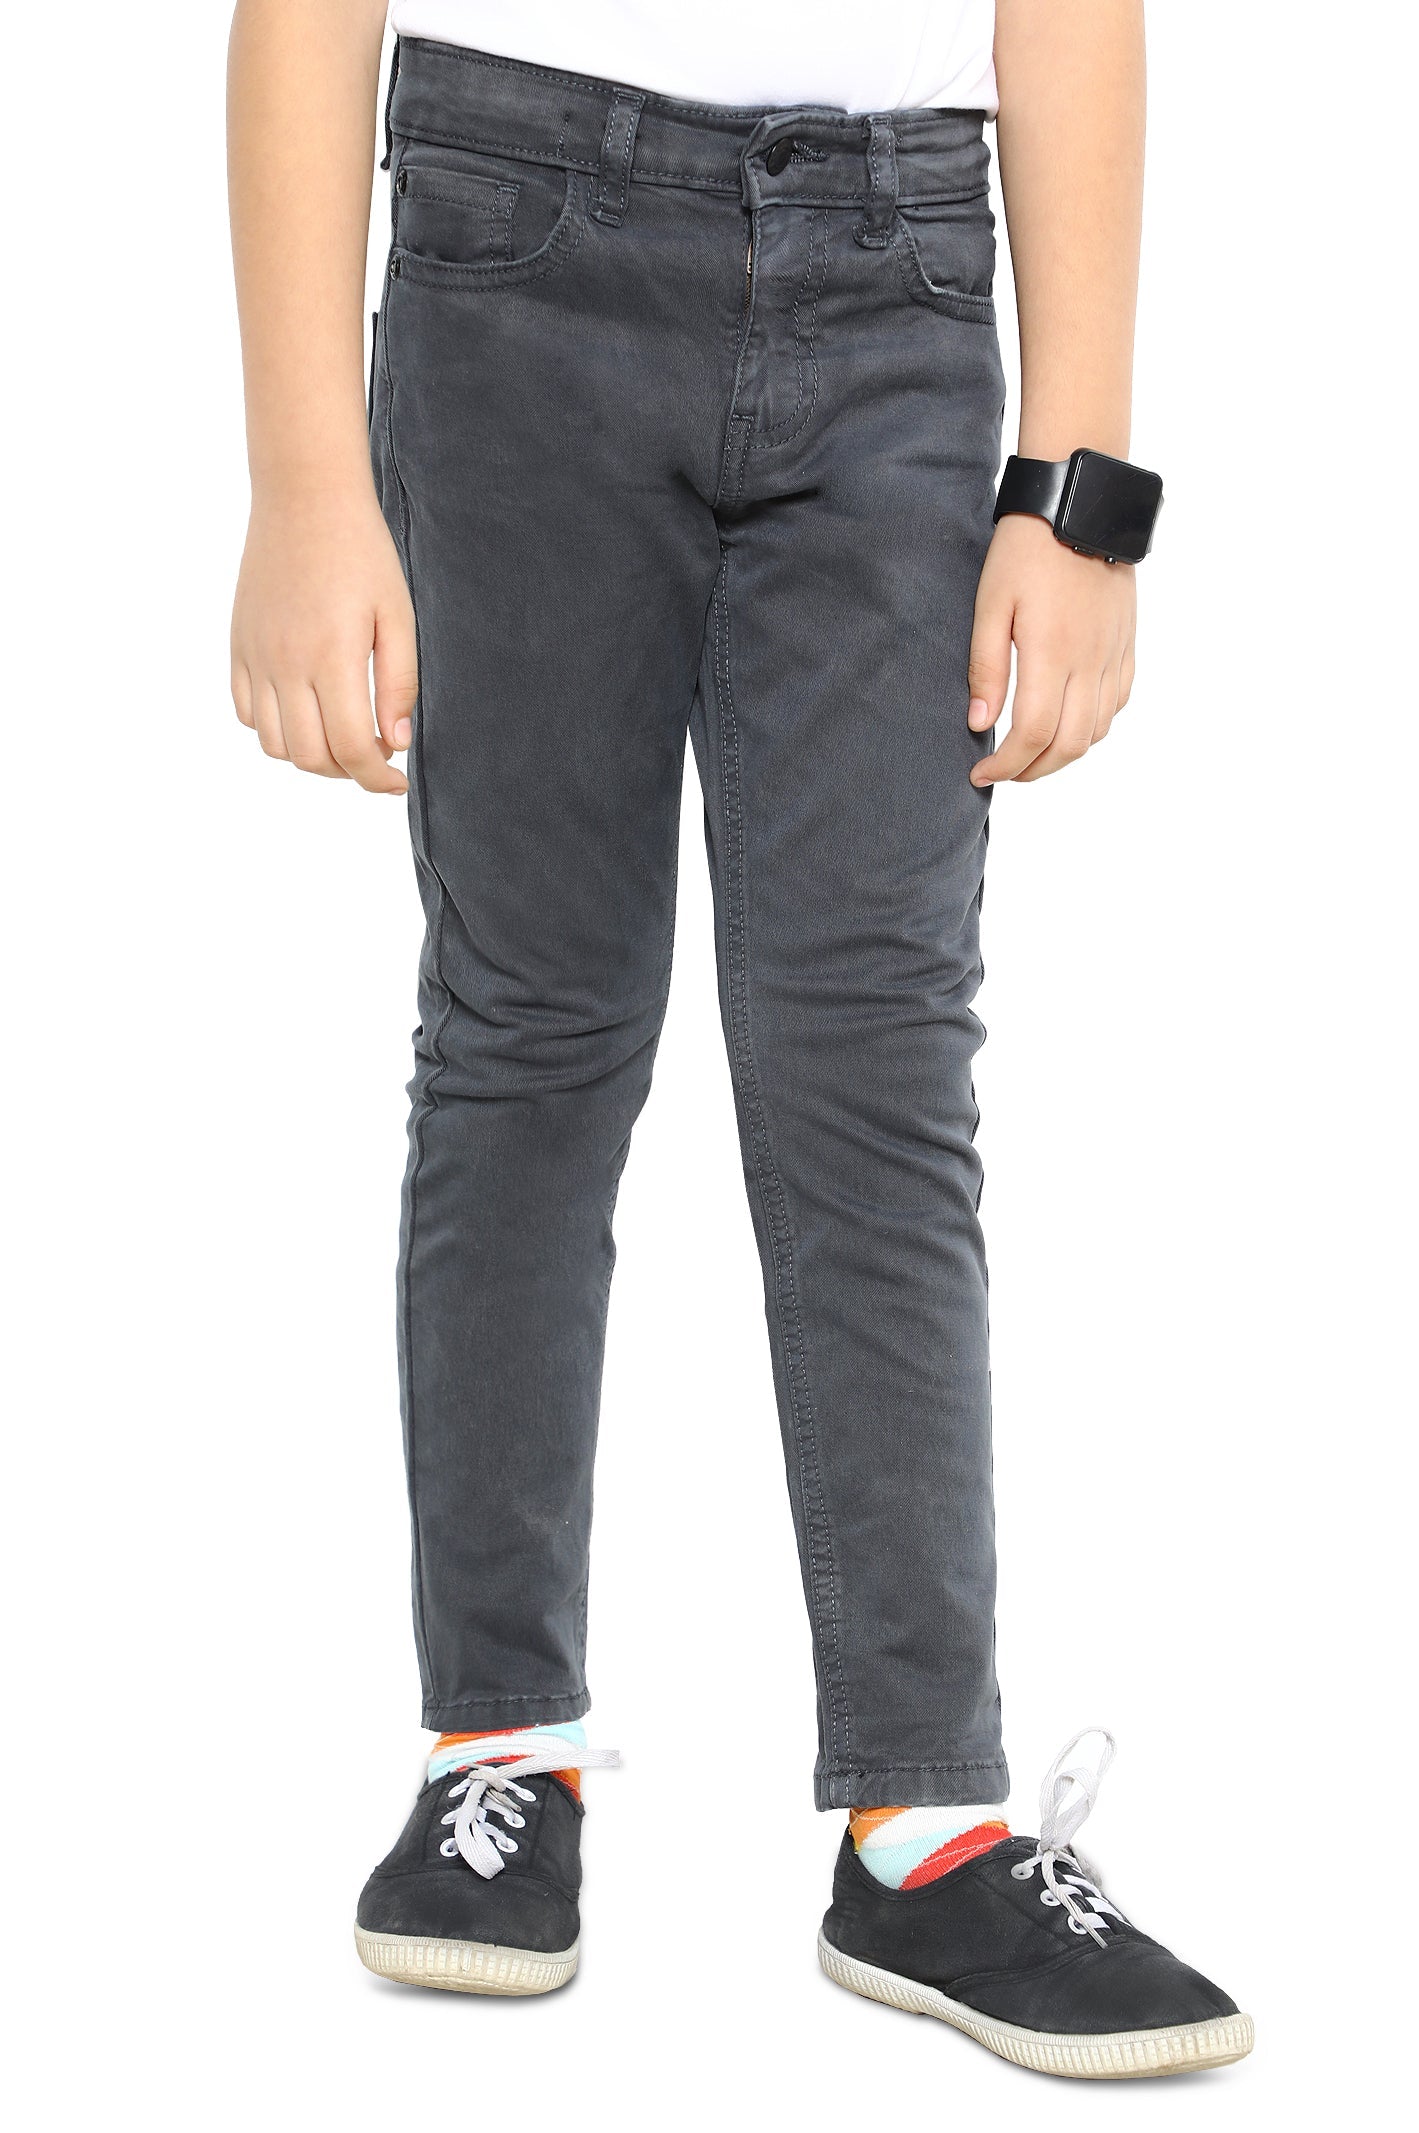 Trouser For Kids SKU: KBC-0413-CHARCOAL - Diners